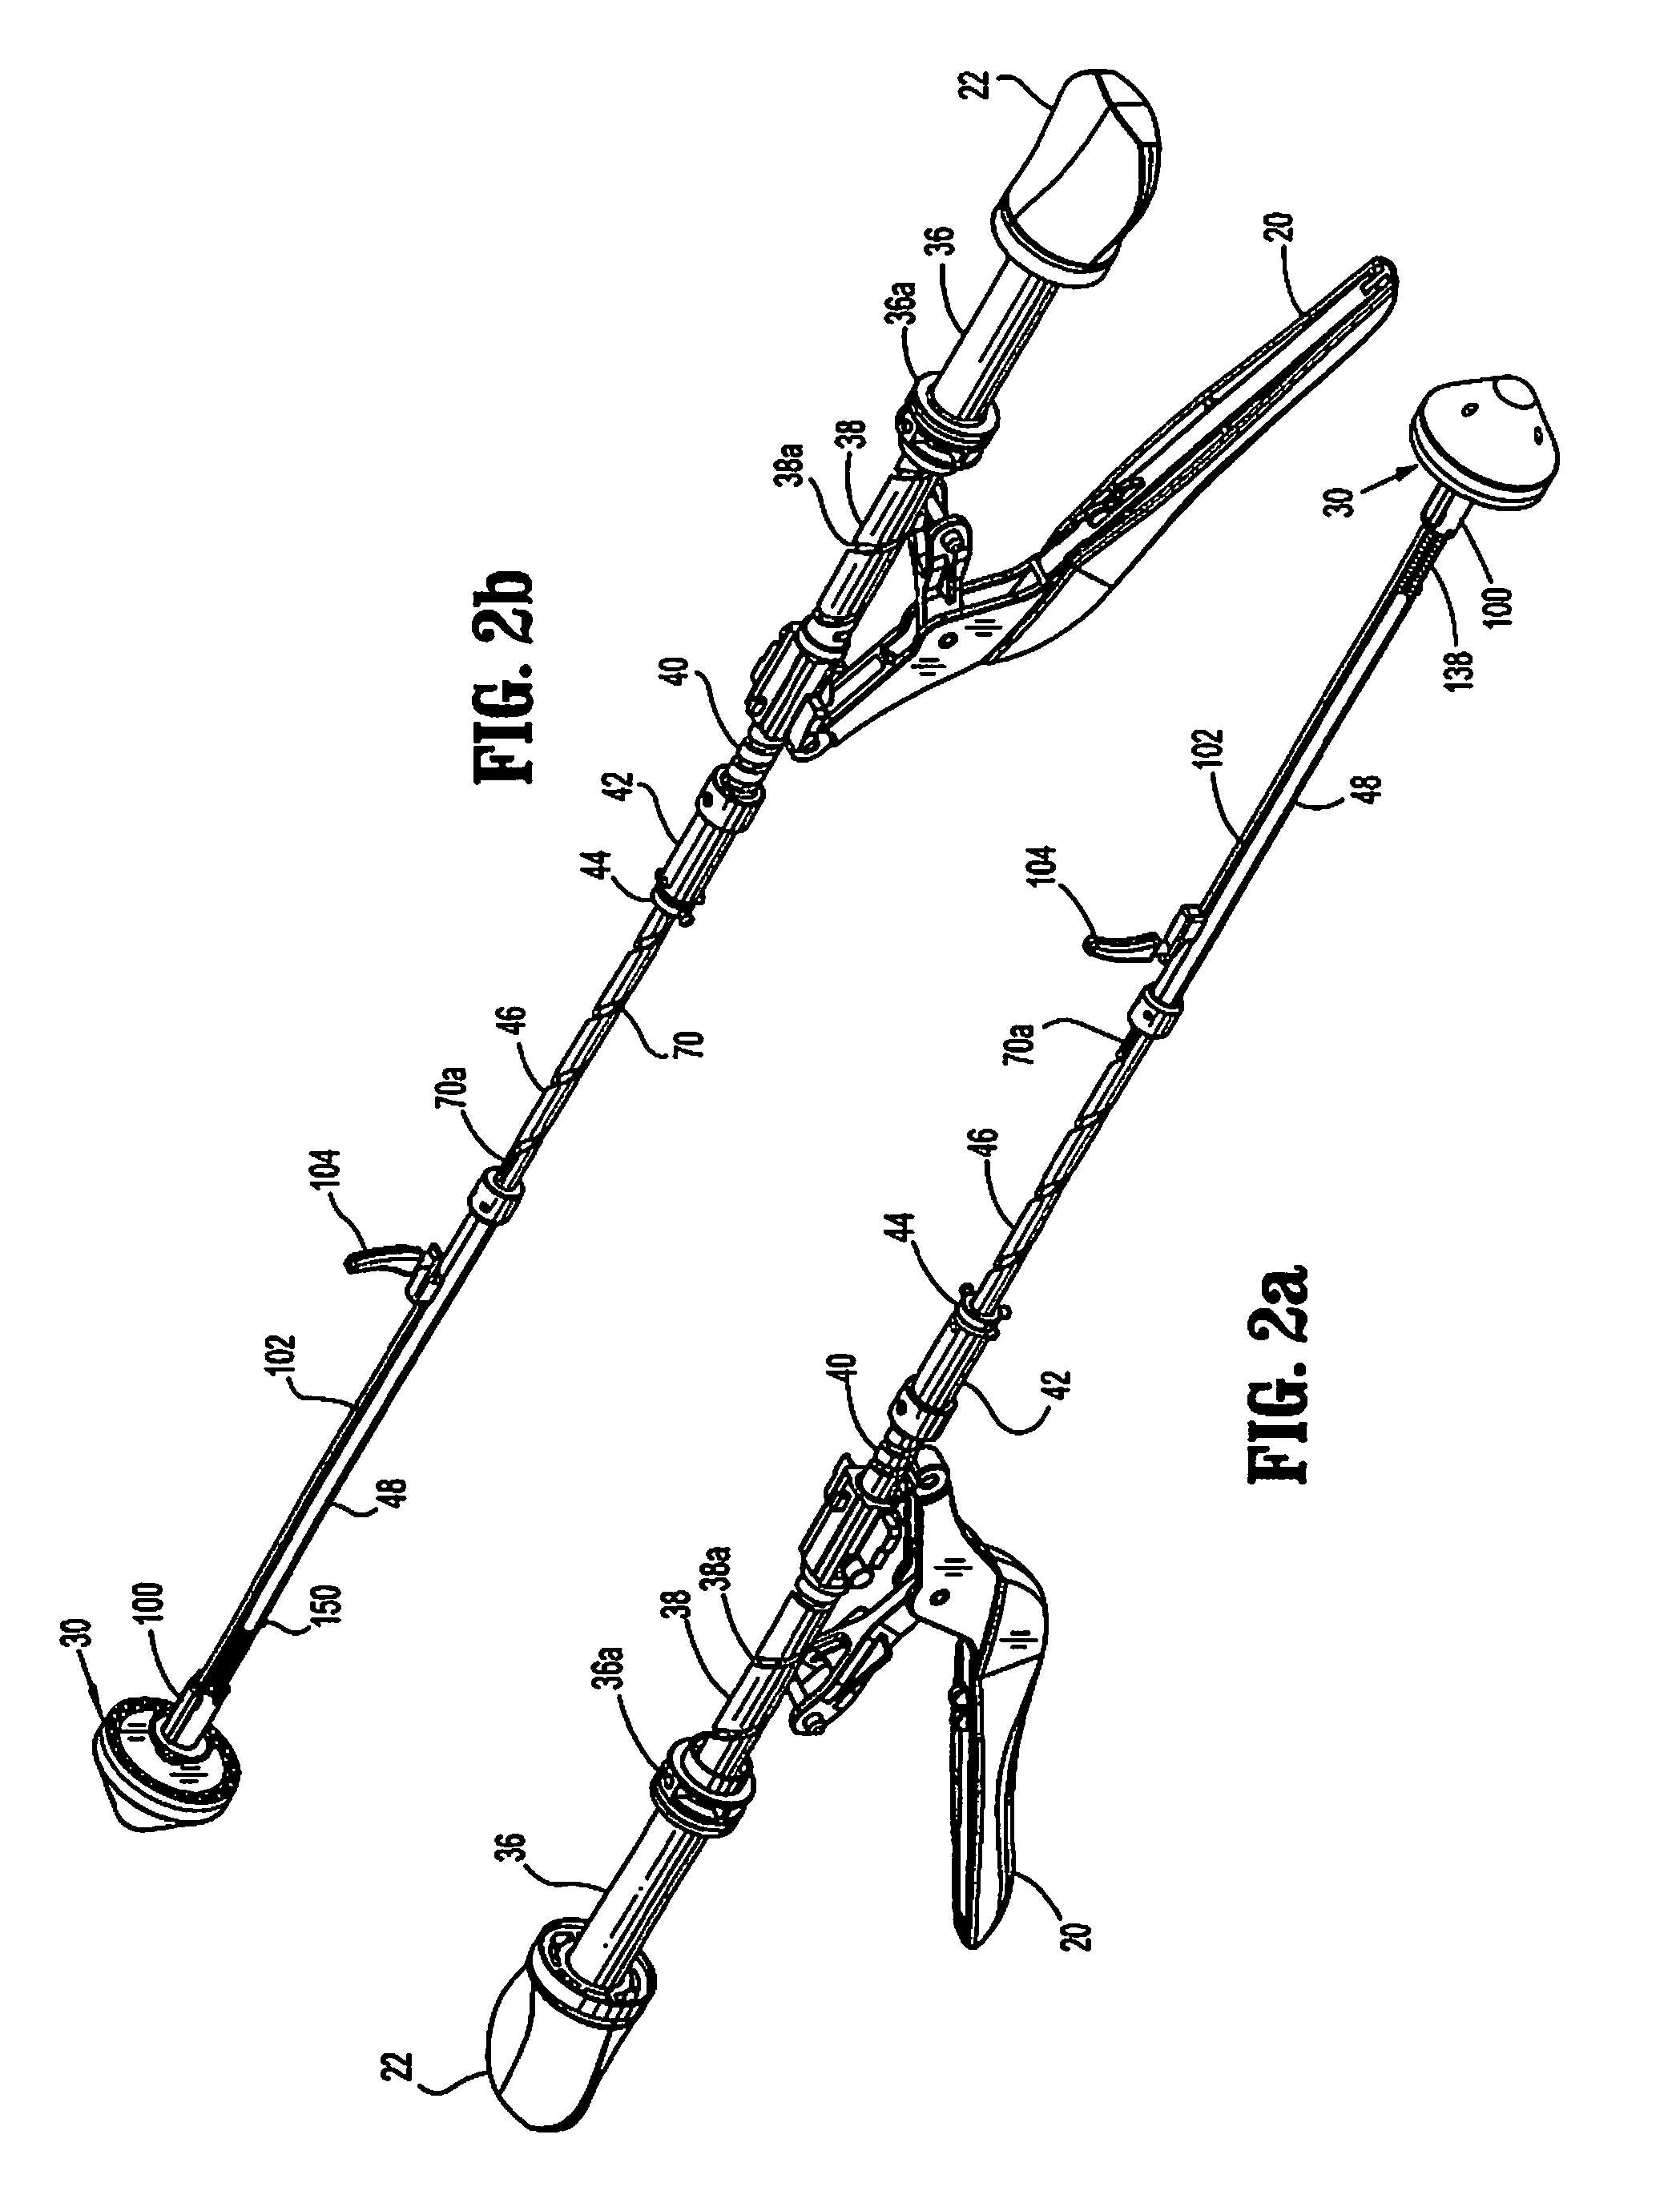 Tissue tensioner assembly and approximation mechanism for surgical stapling device